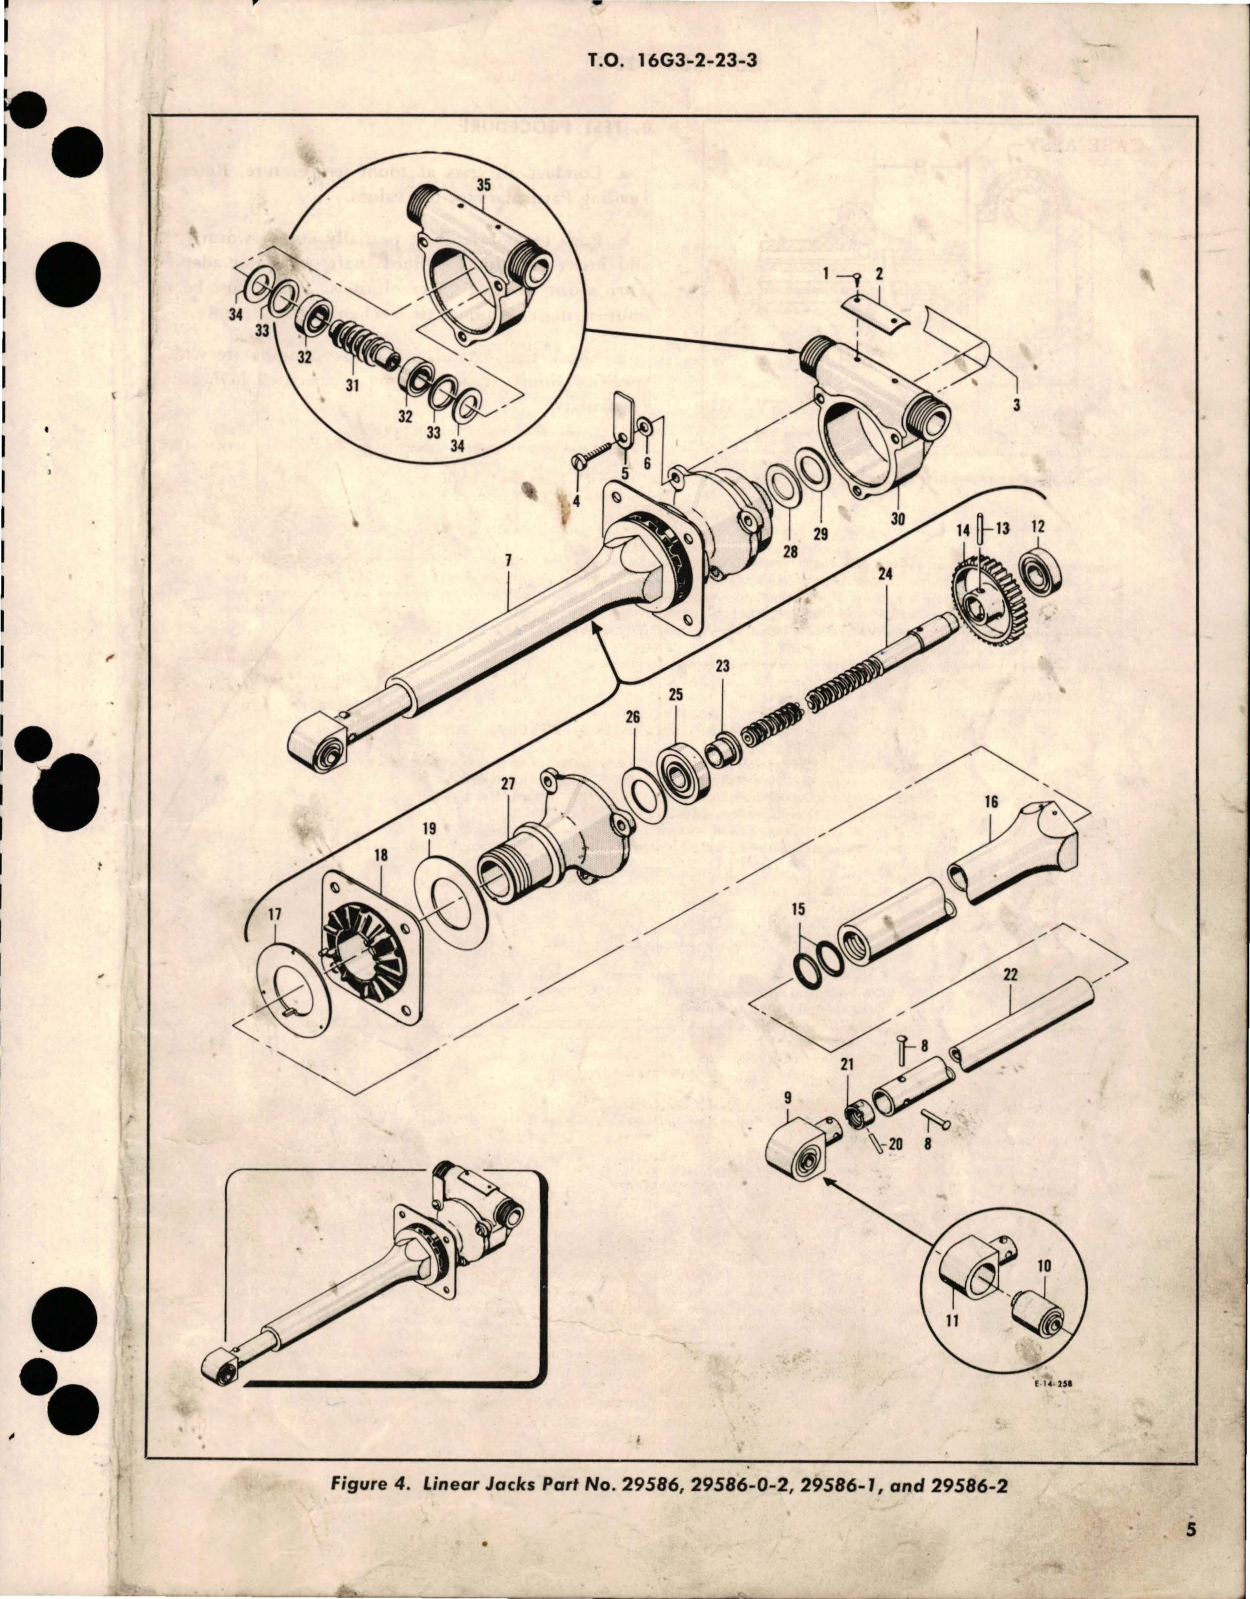 Sample page 5 from AirCorps Library document: Overhaul with Parts Breakdown for Linear Jacks - Parts 29586, 29586-1, 29586-2, and 29586-0-2 